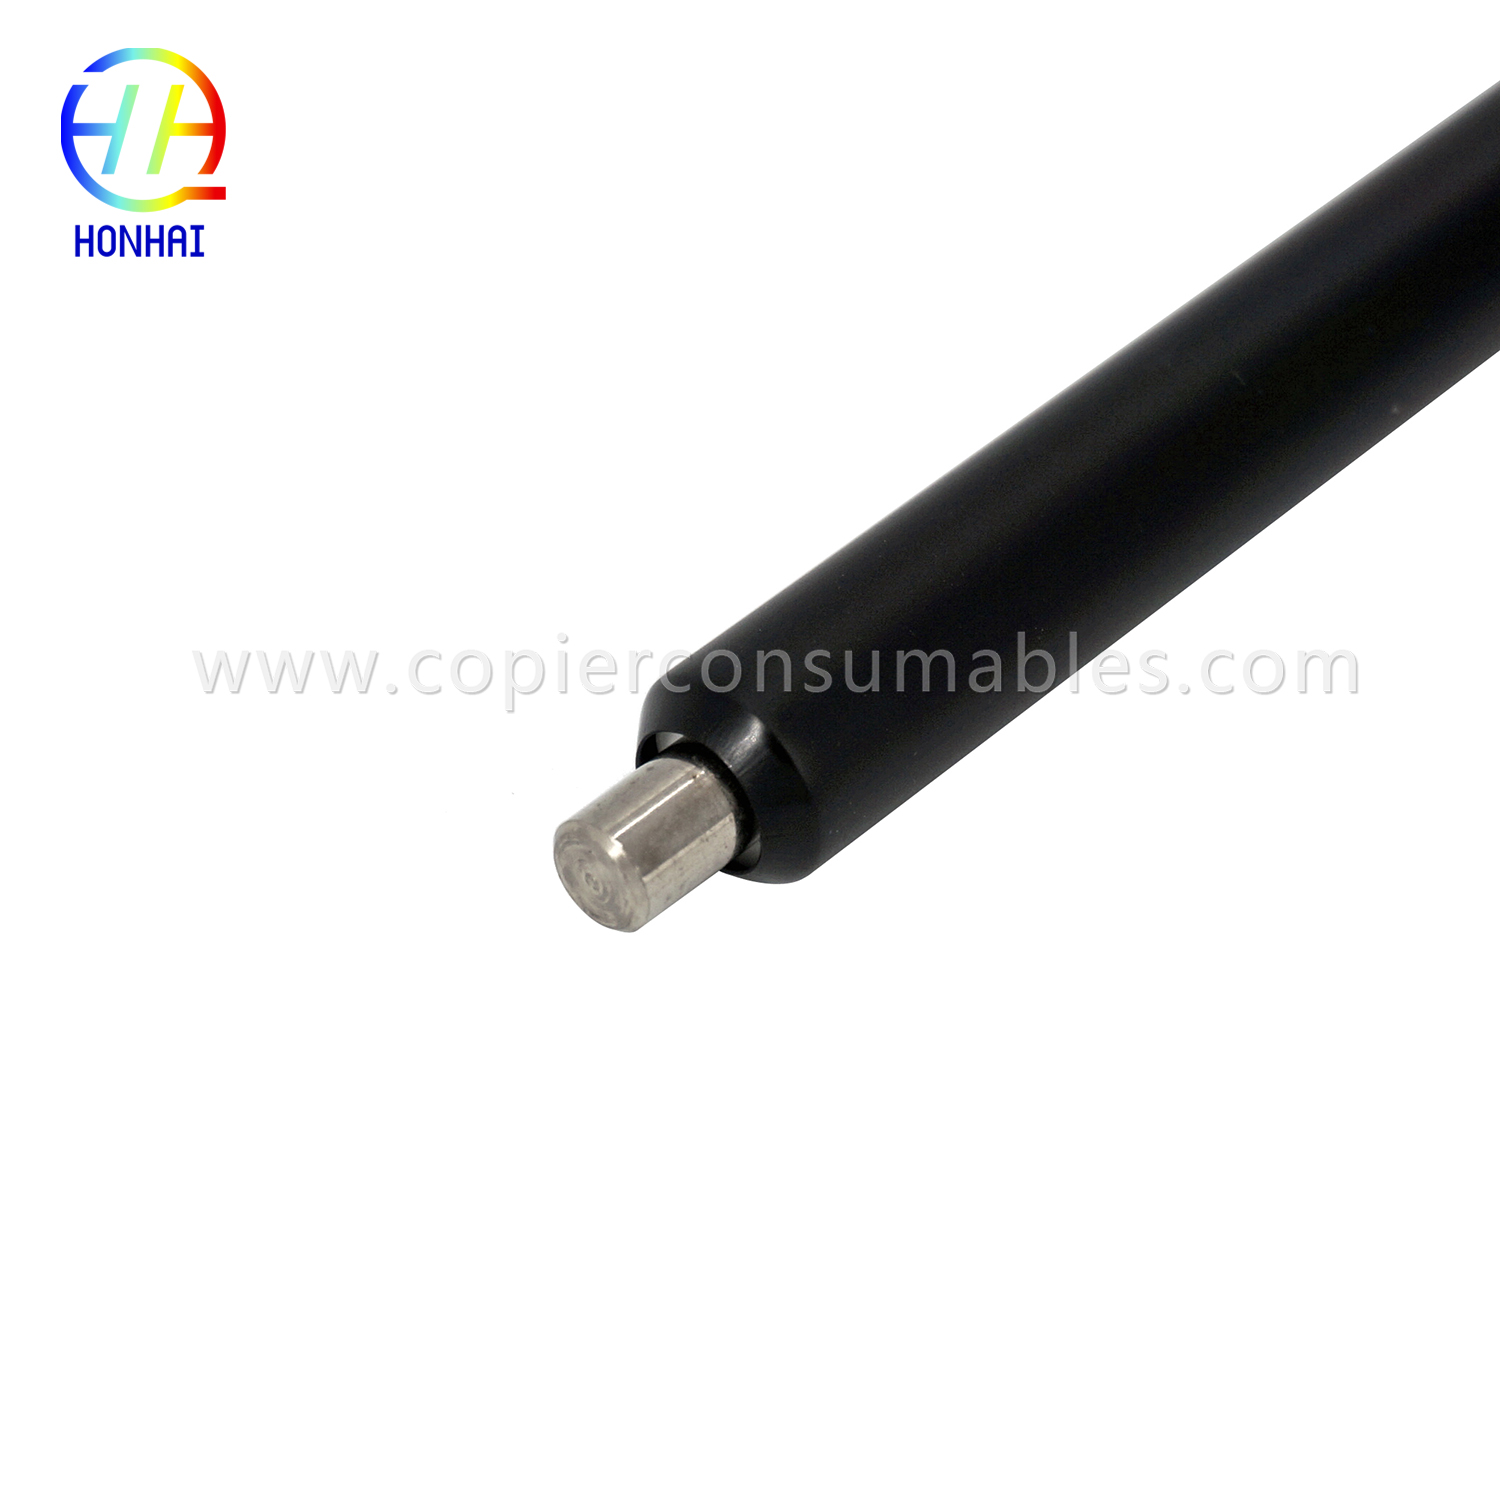 Primary Charge Roller for HP P2035 P2035n 2055d 2055dn 2035 2055 (7) 拷贝